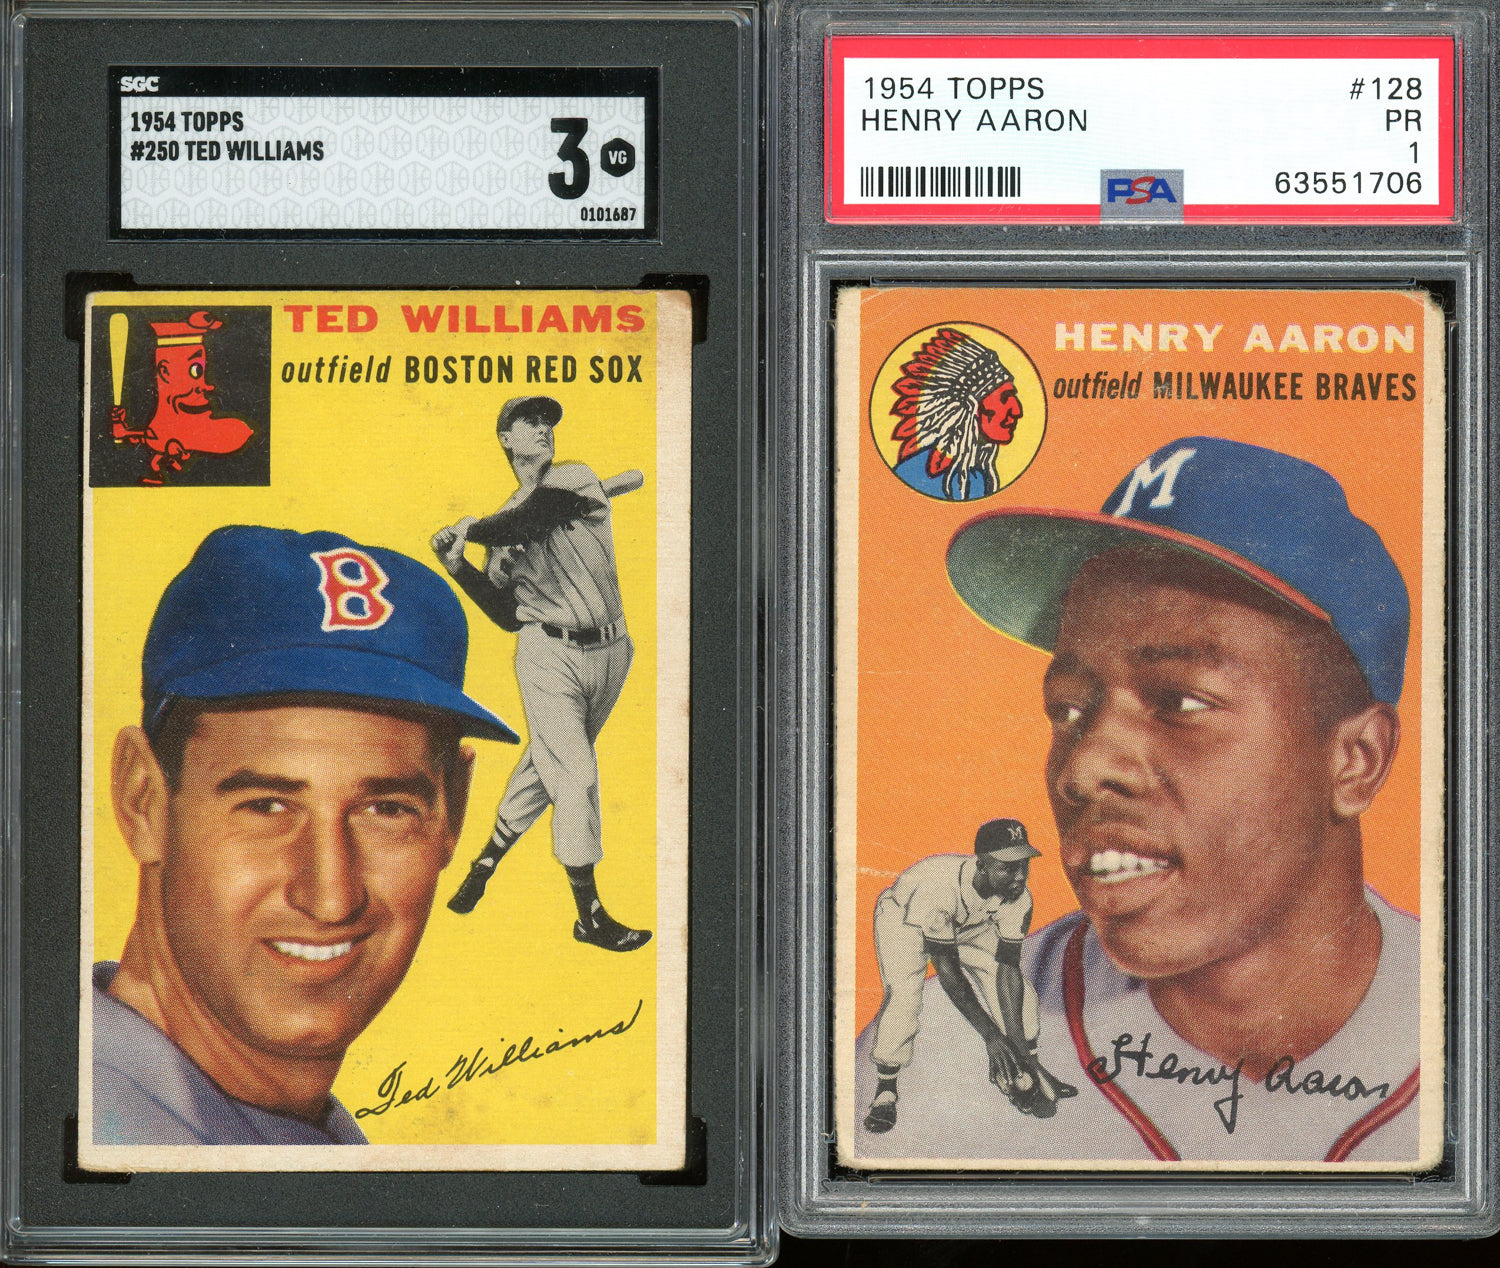 1954 Topps Hank Aaron PSA 1 – Great Moments Sports Cards